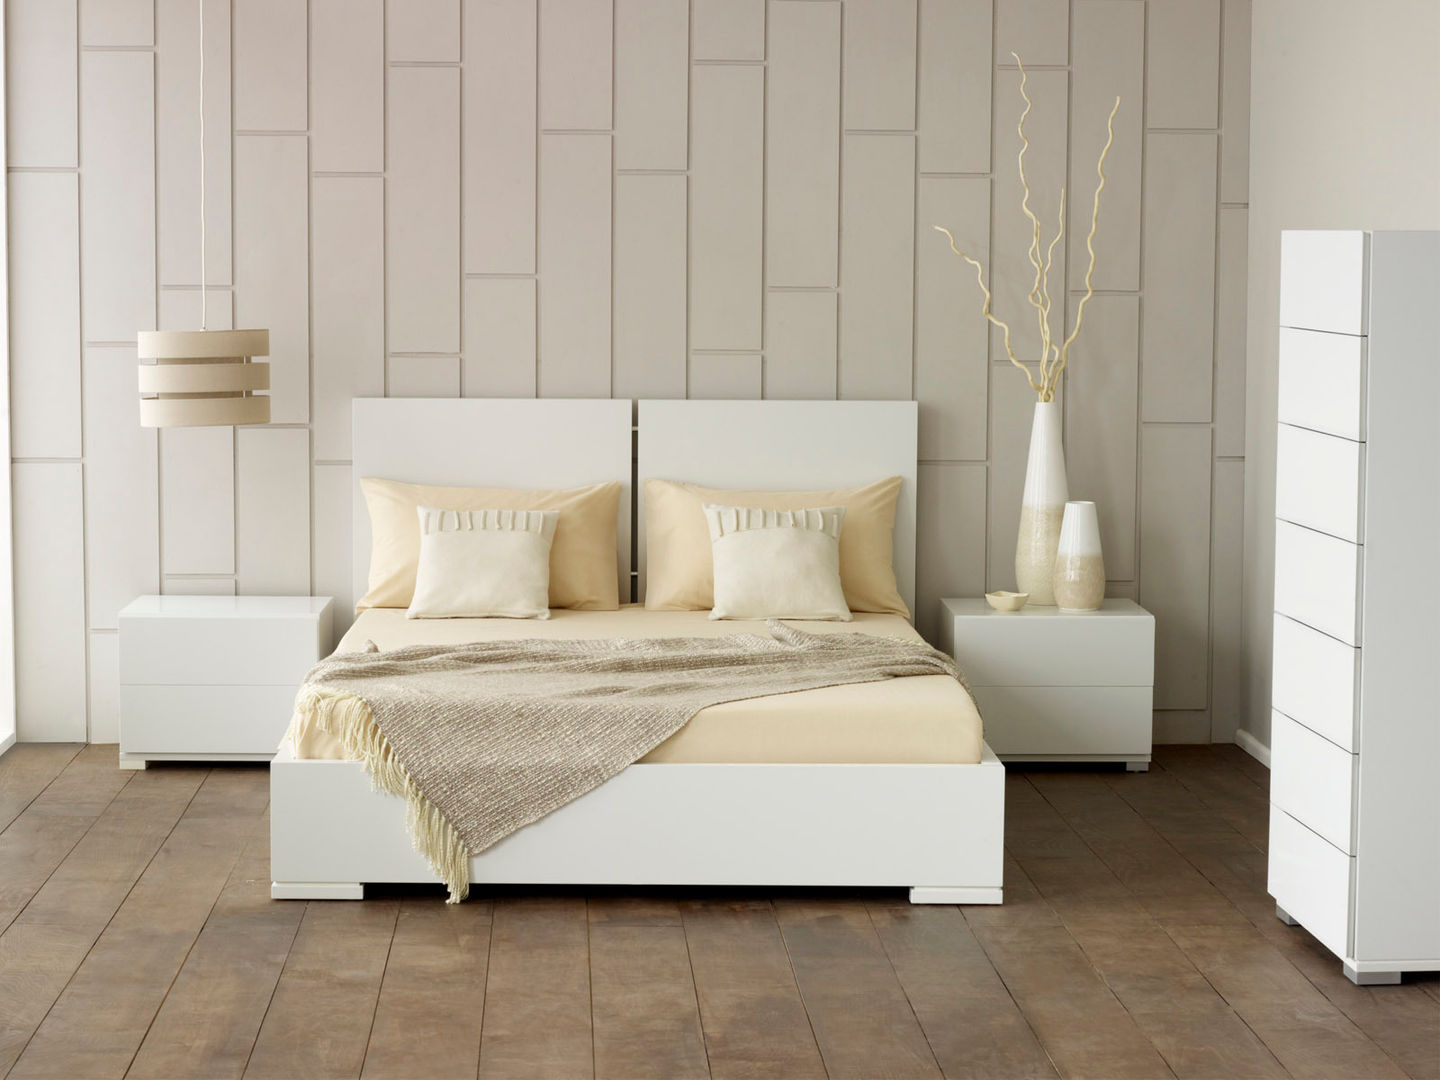 Verona White Bed homify Modern style bedroom Beds & headboards